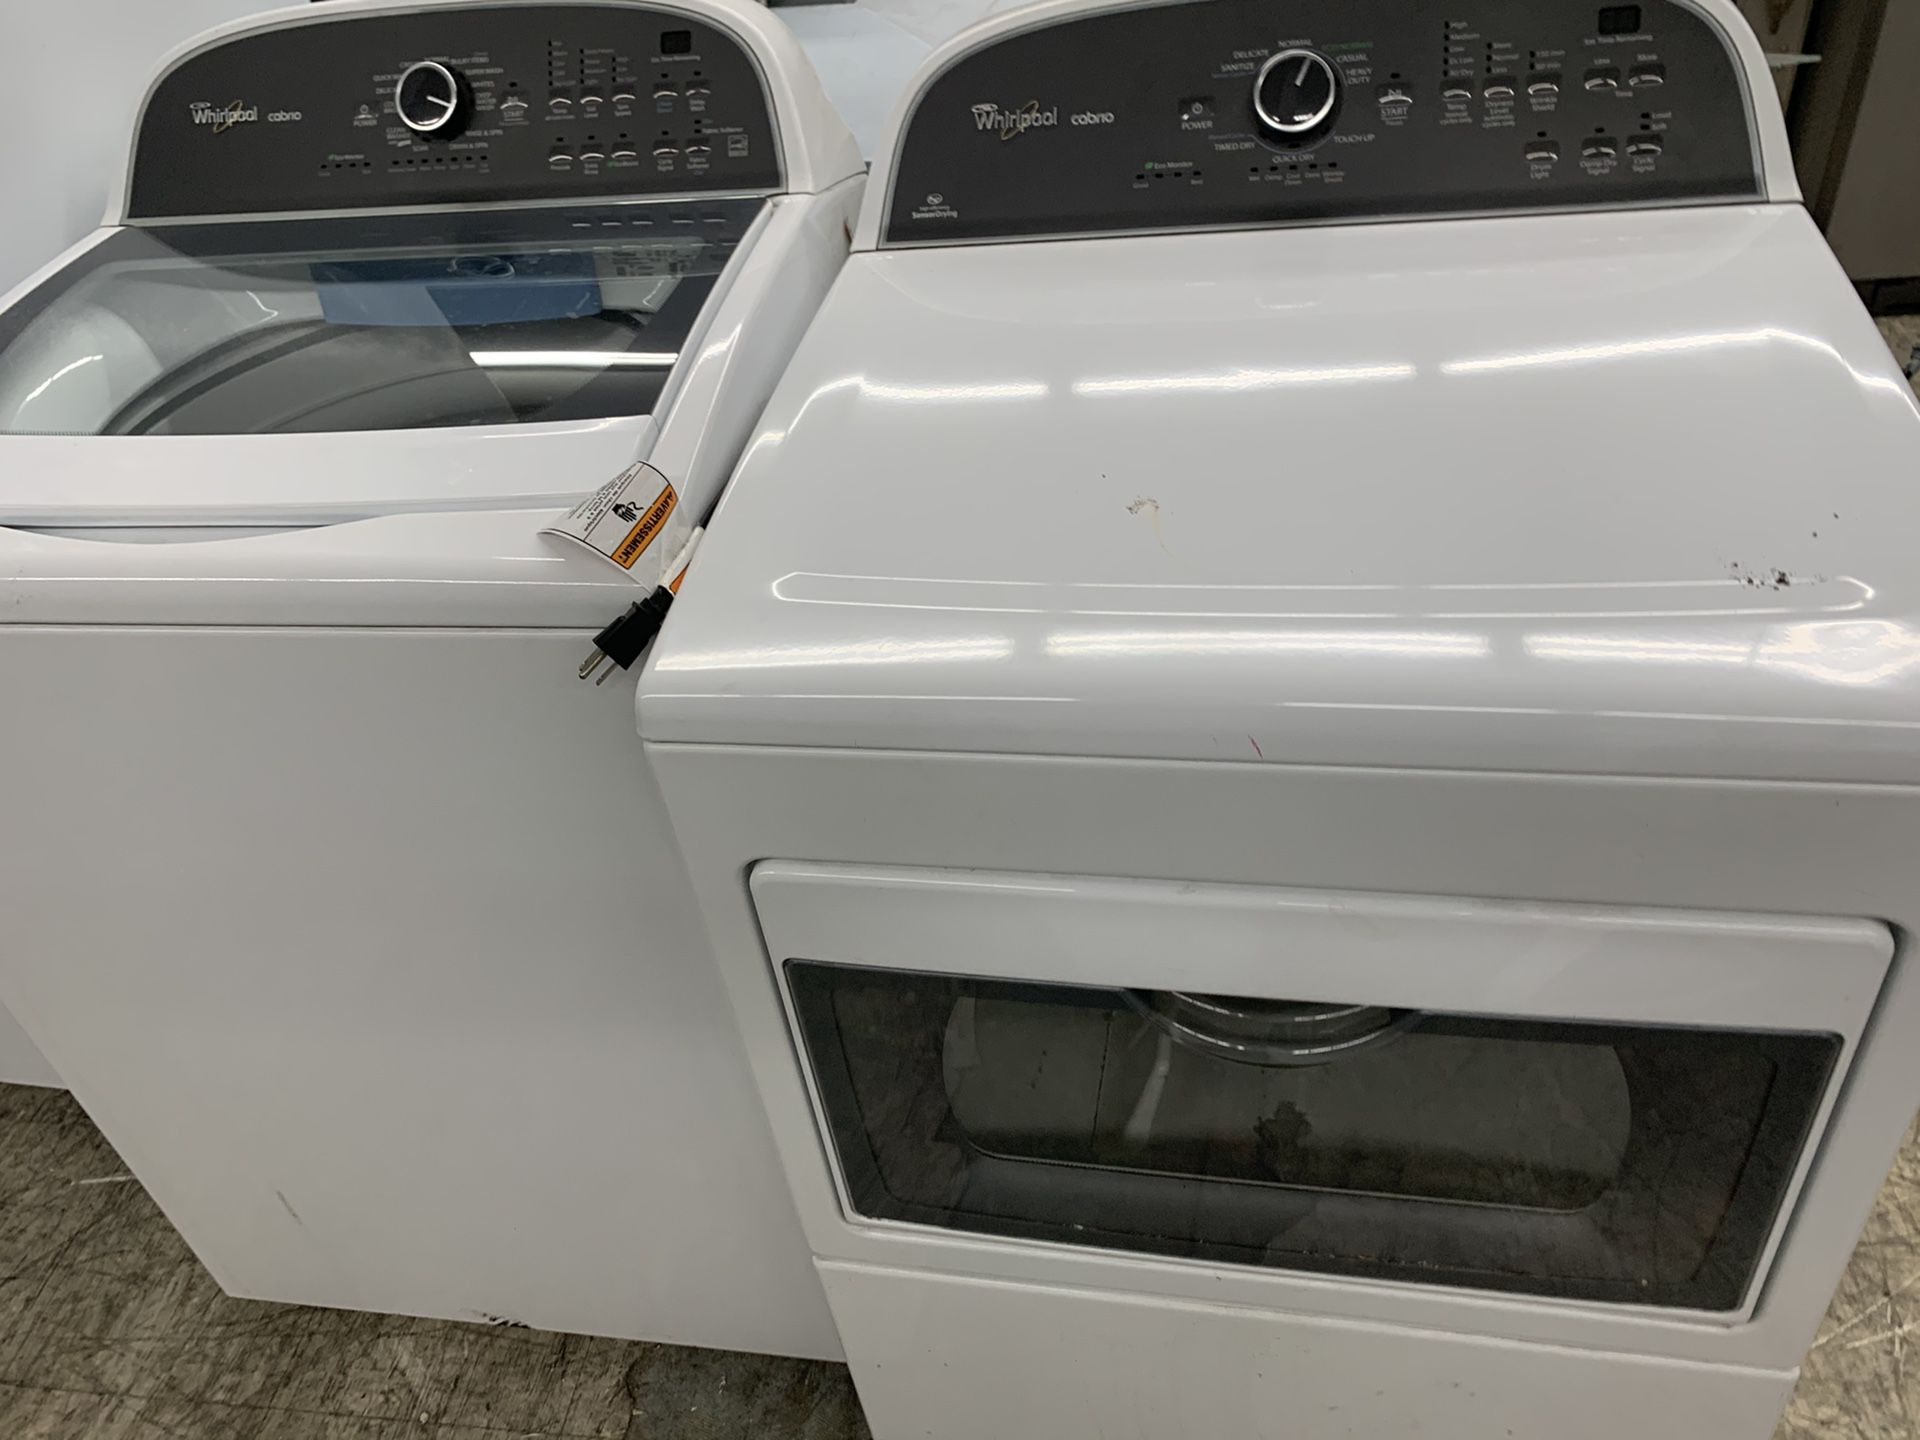 Whirlpool washer & dryer set in white used